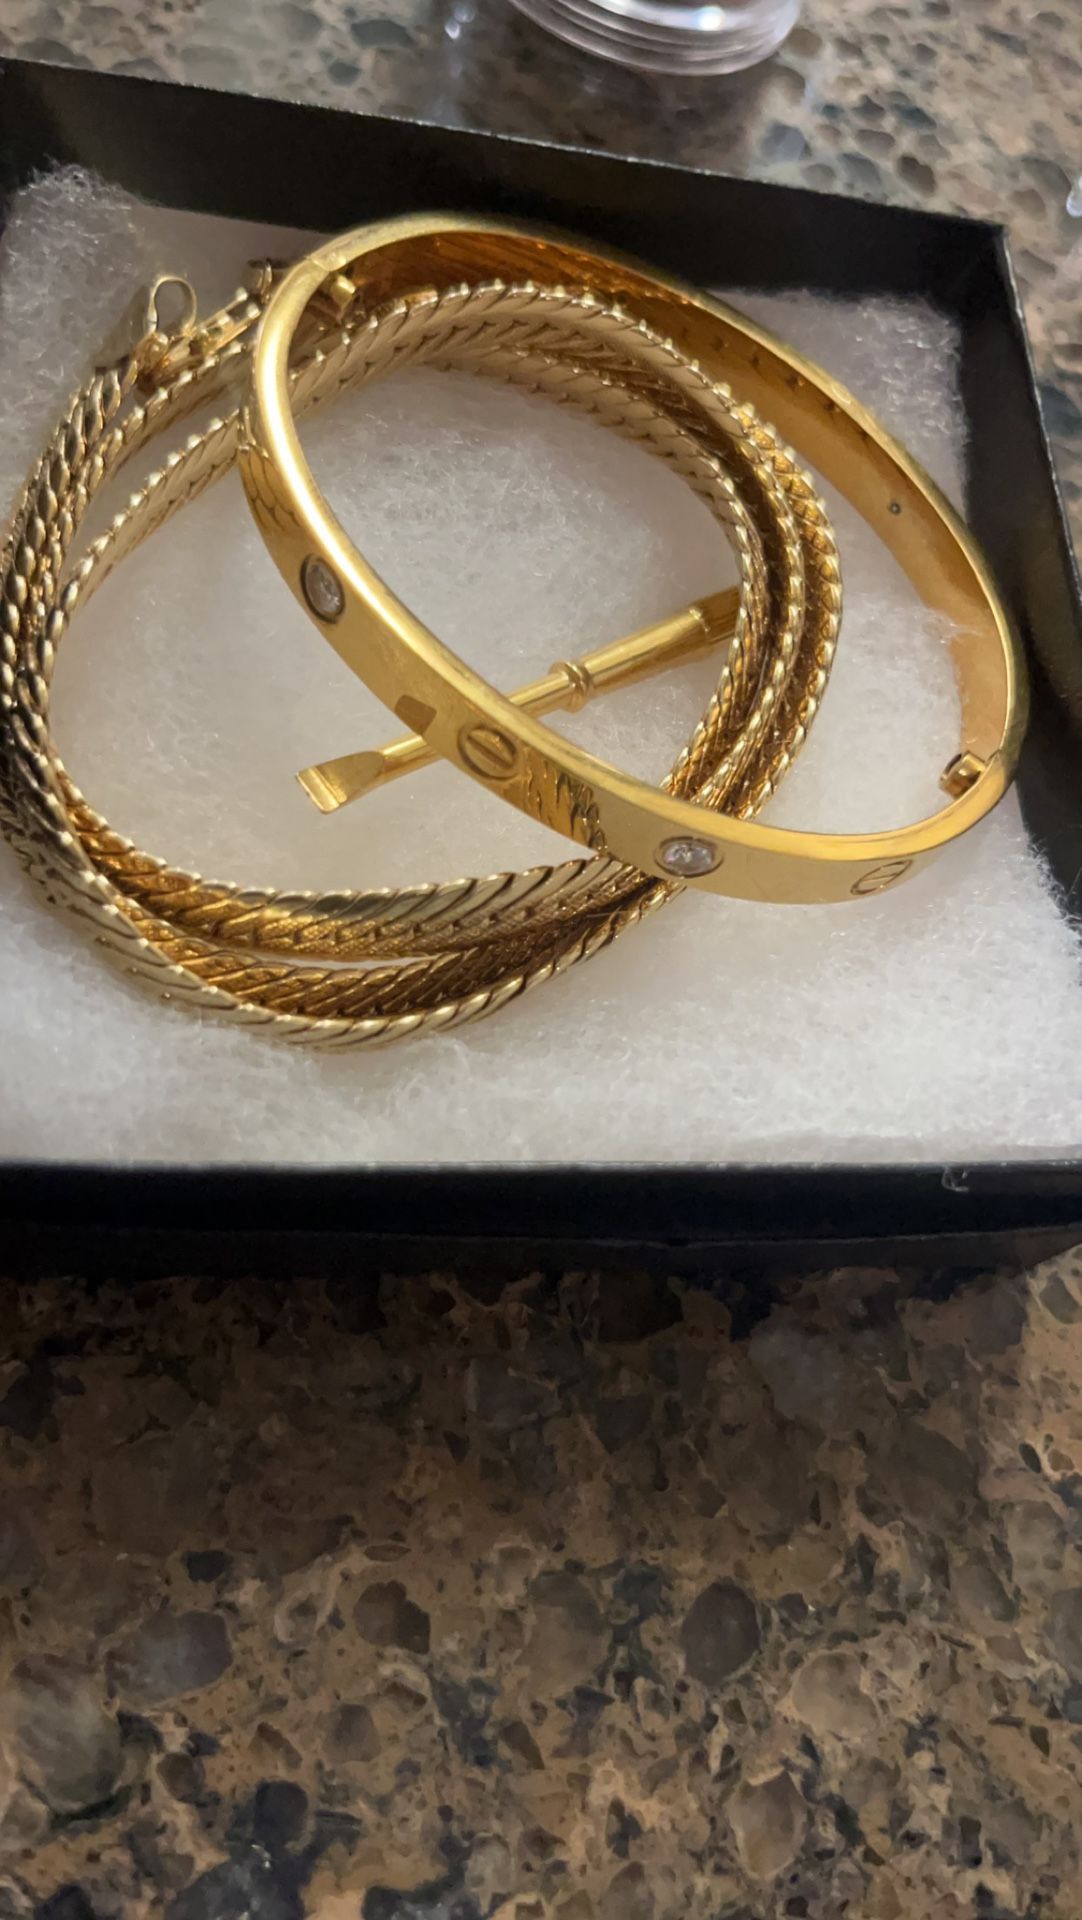 Cartier Bracelet And Herringbone Chain(perfect Gift For Mother’s Day)